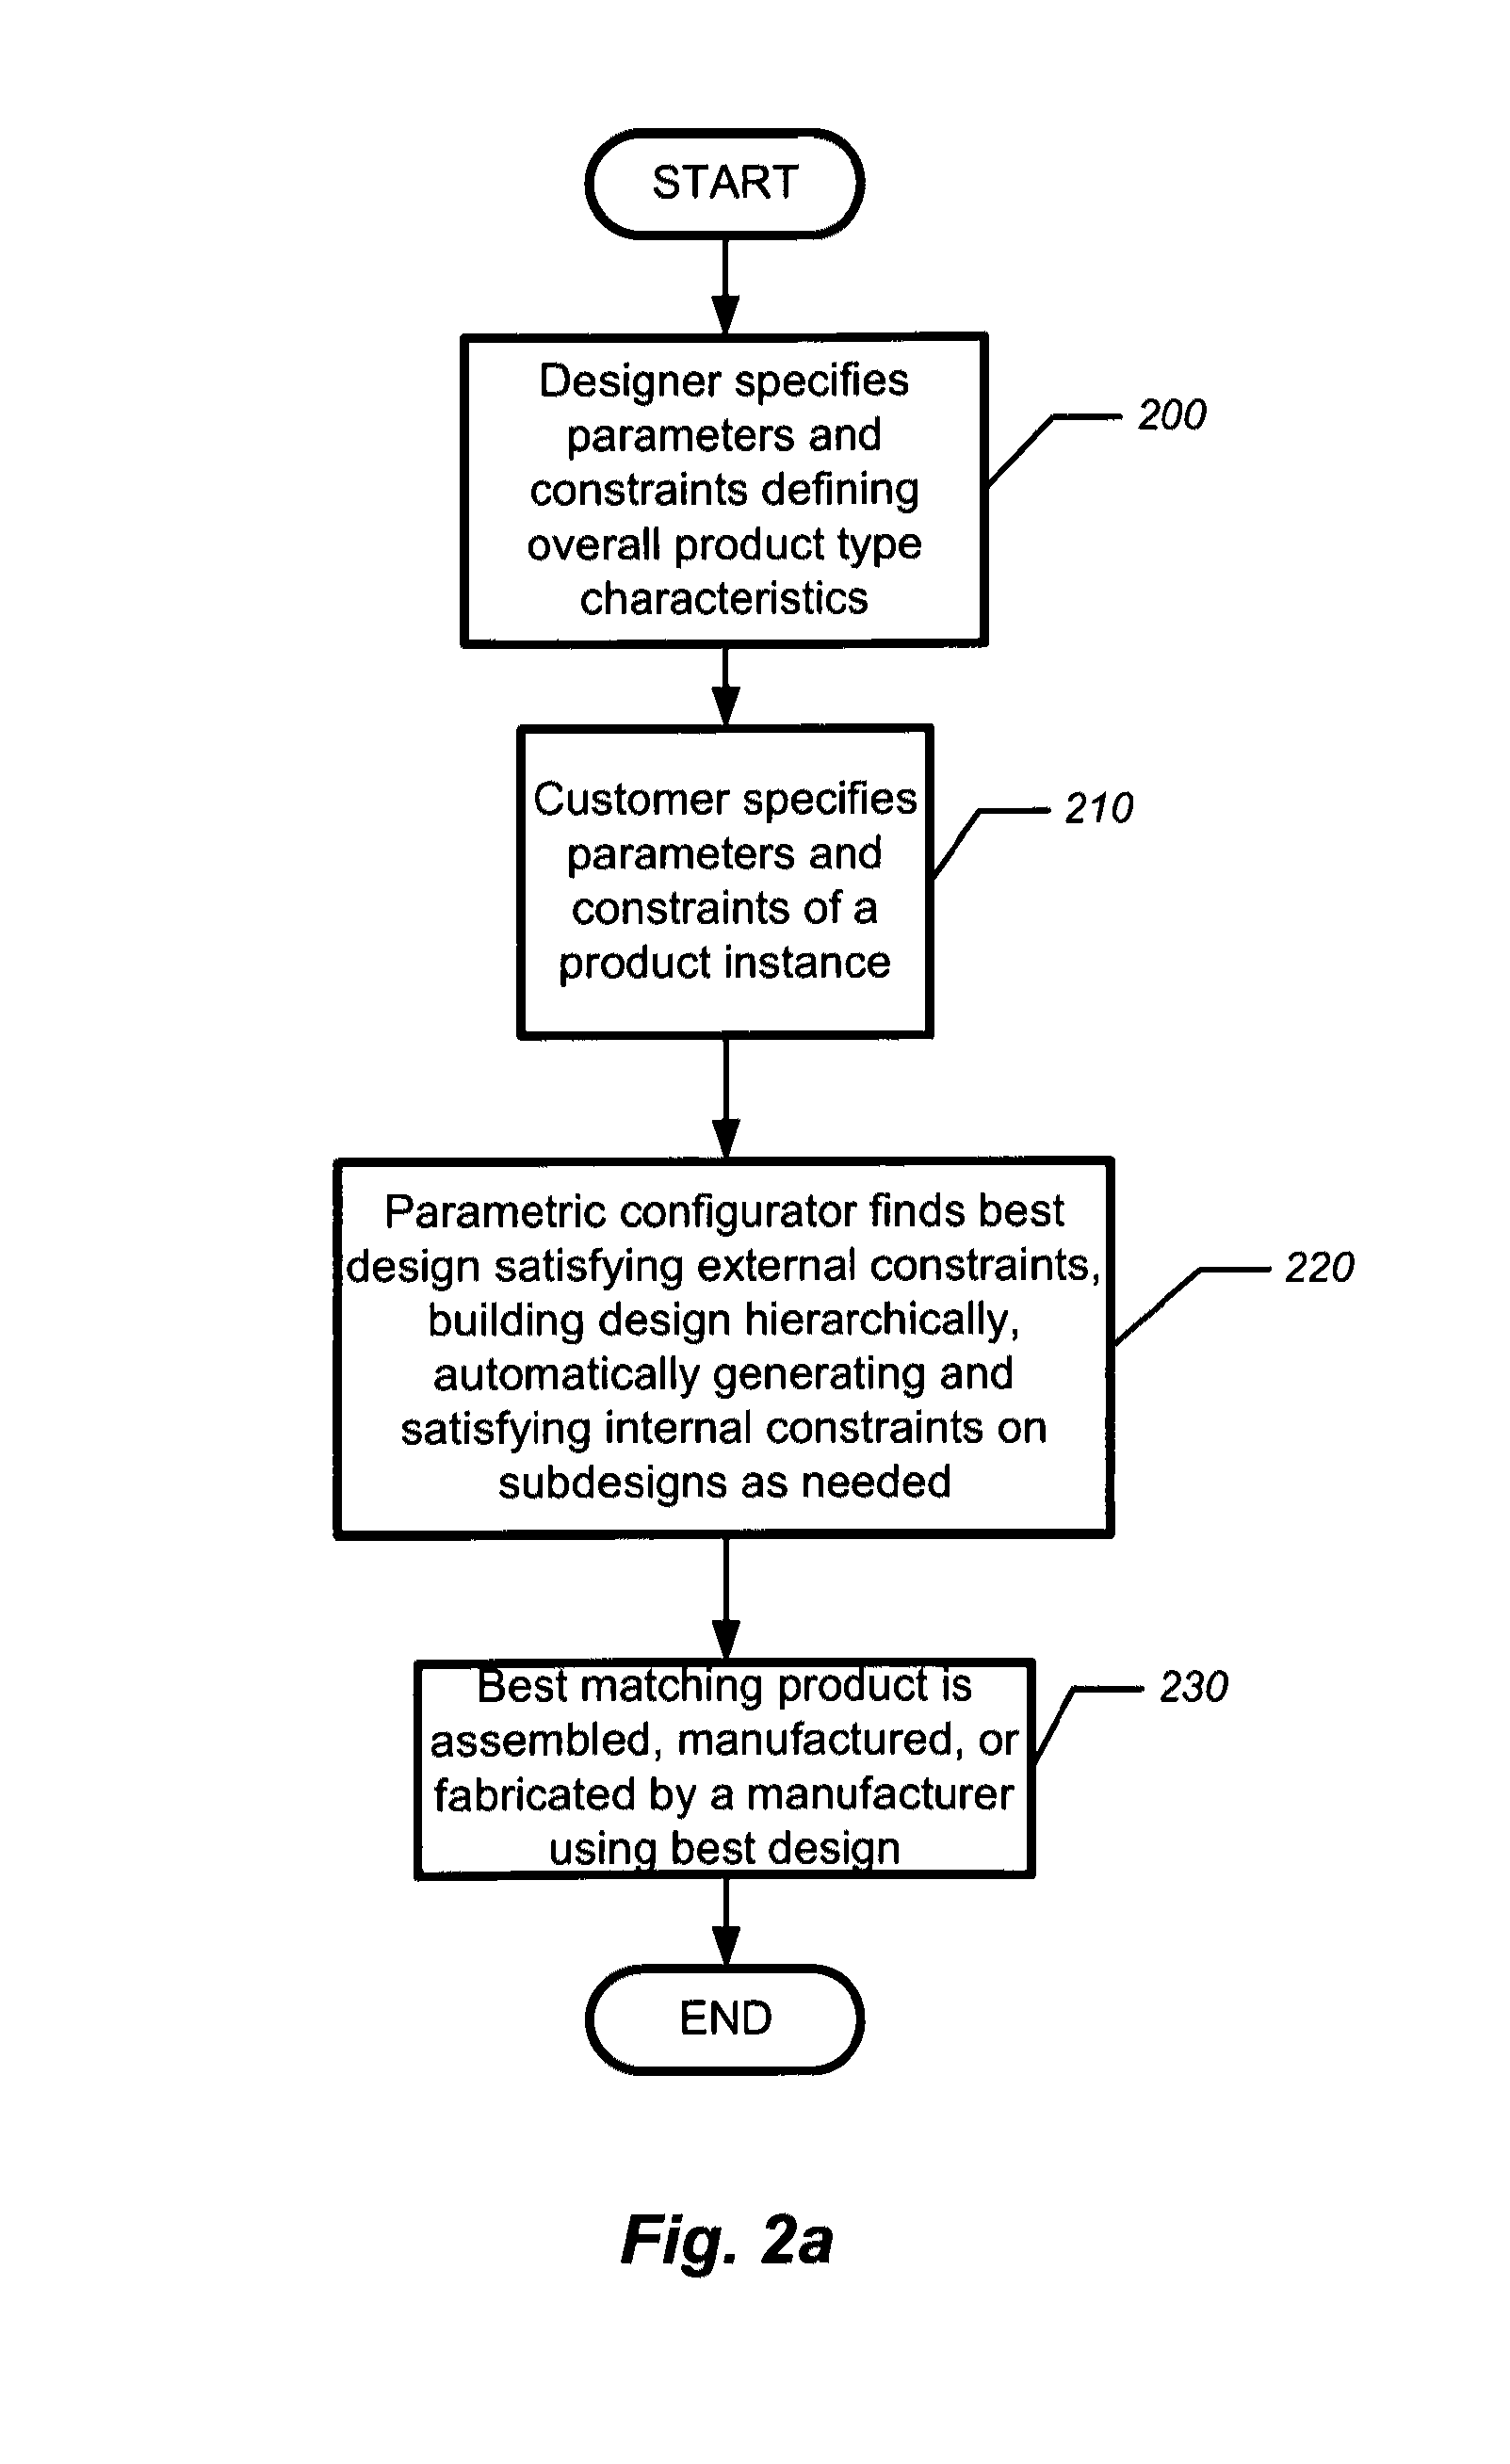 Automated hierarchical configuration of custom products with complex geometries: method and apparatus